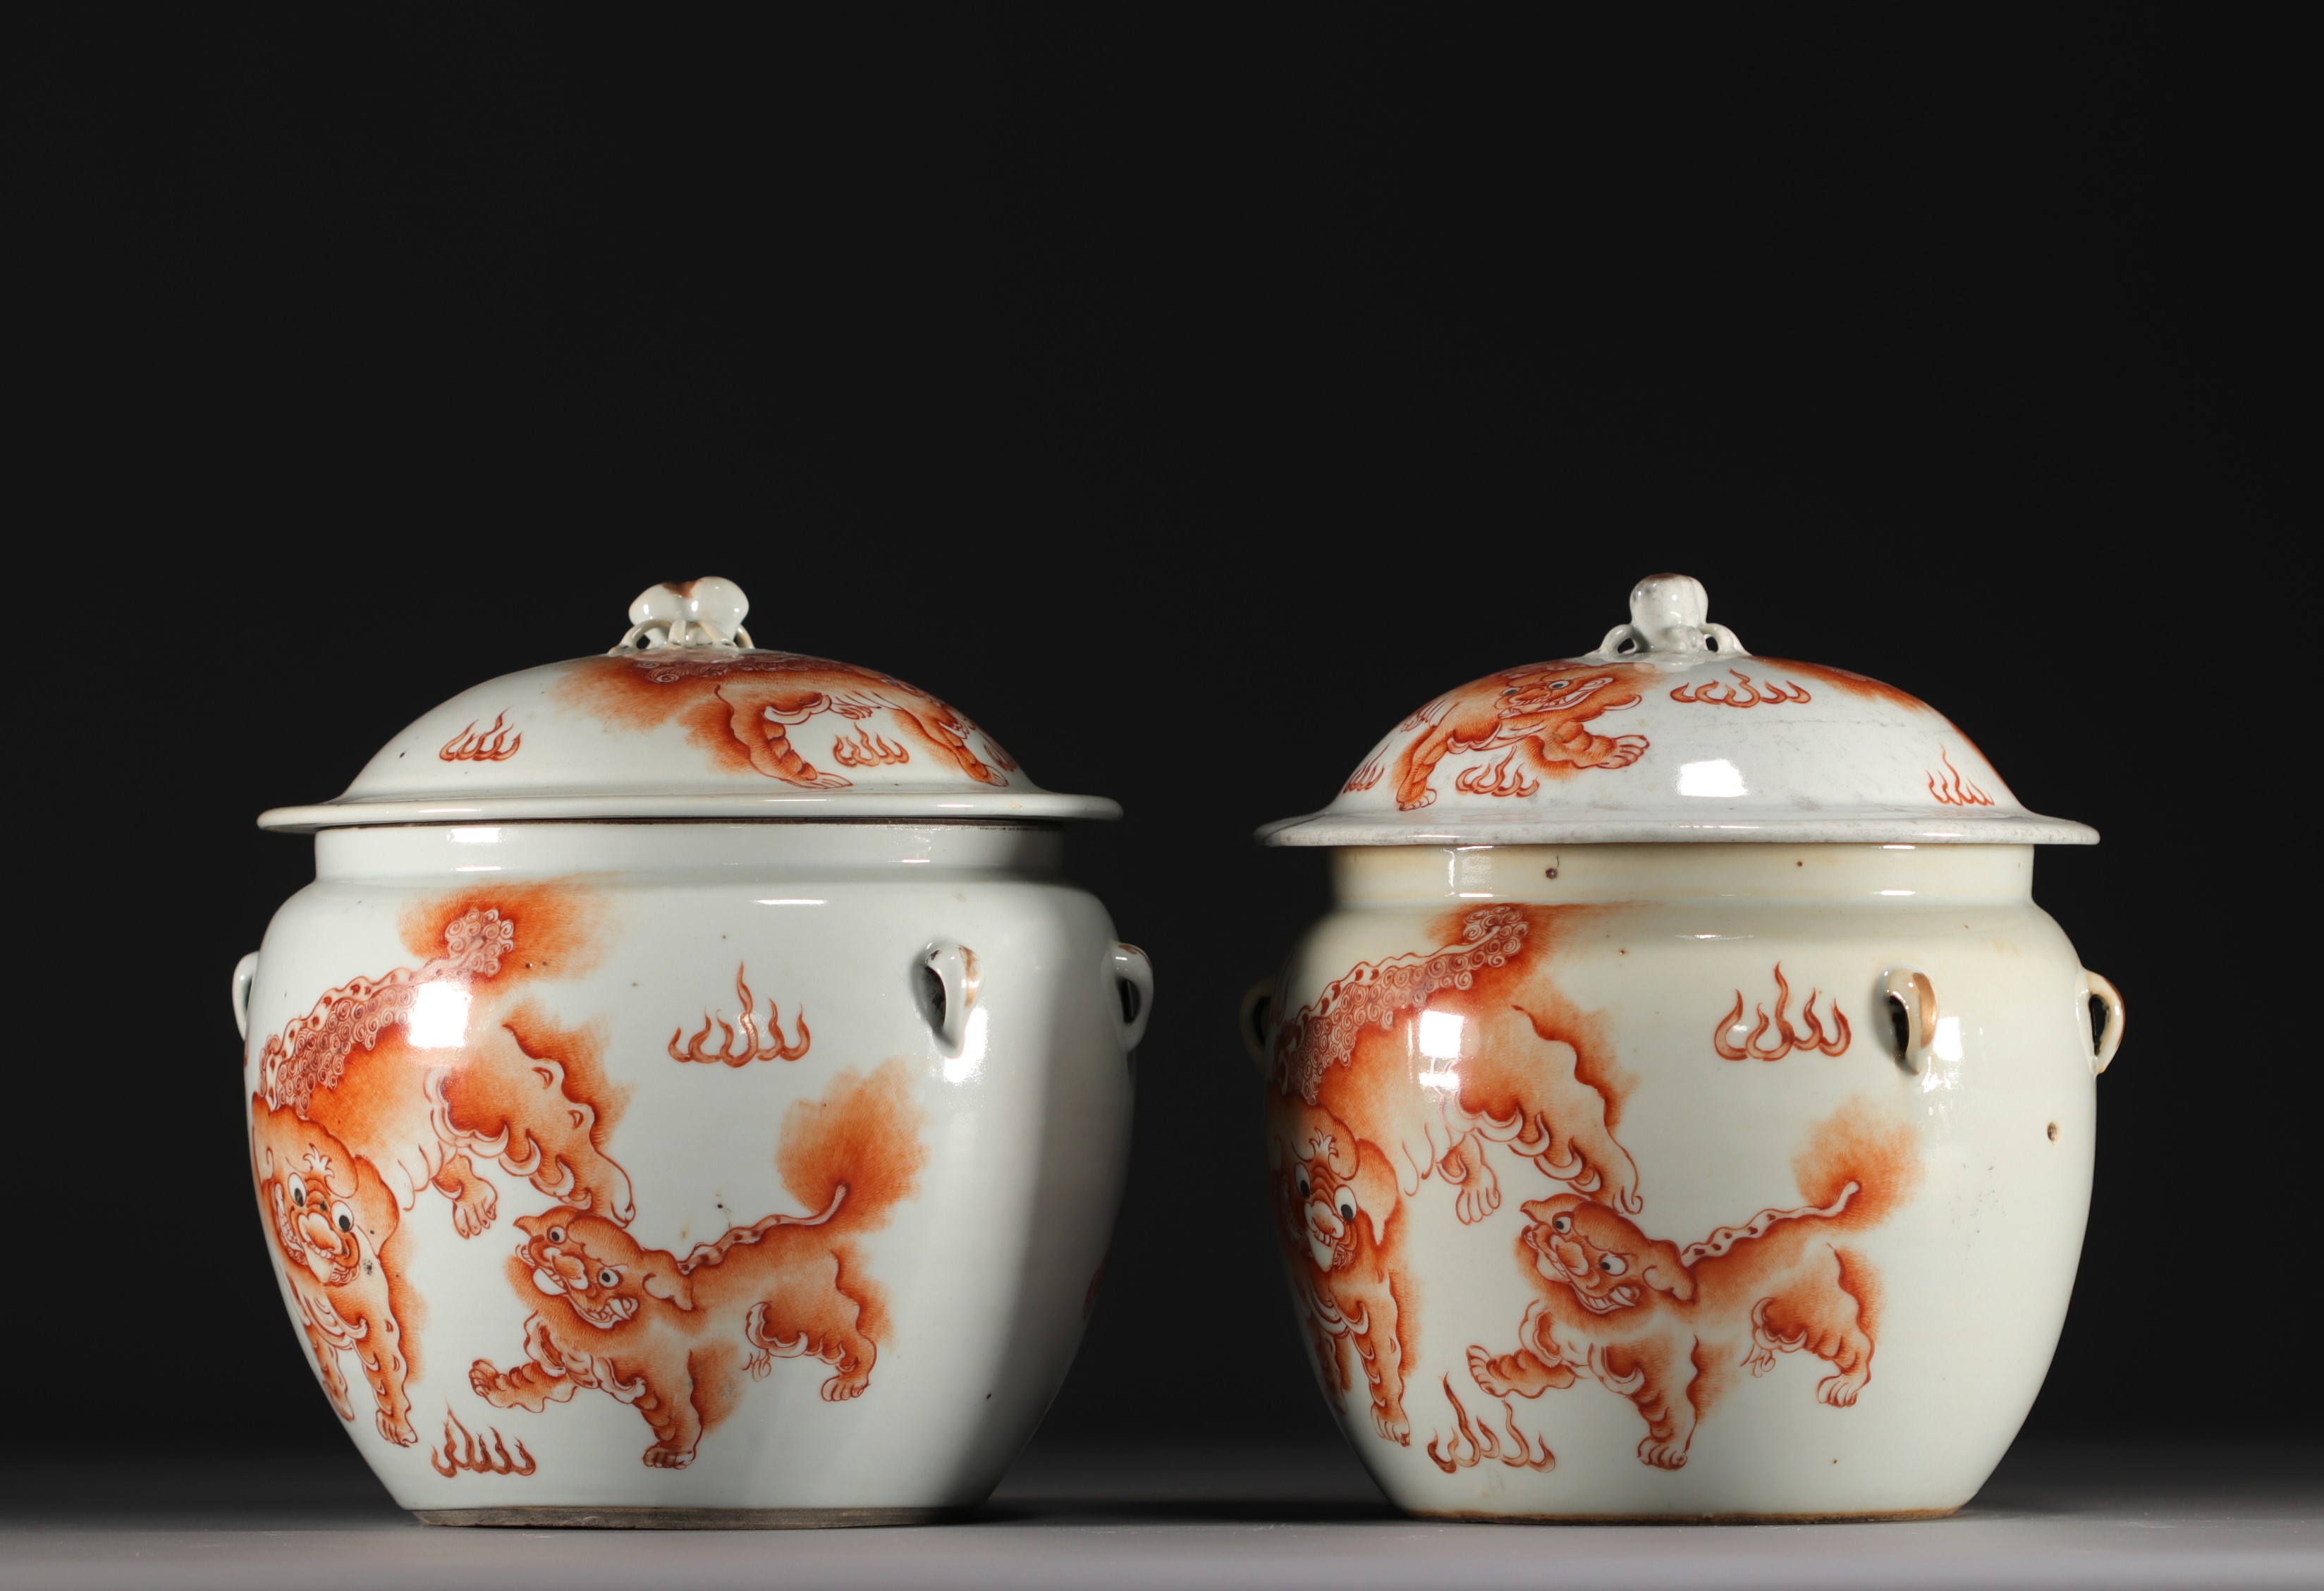 China - Pair of covered terrines decorated with iron-red lions, 19th century.